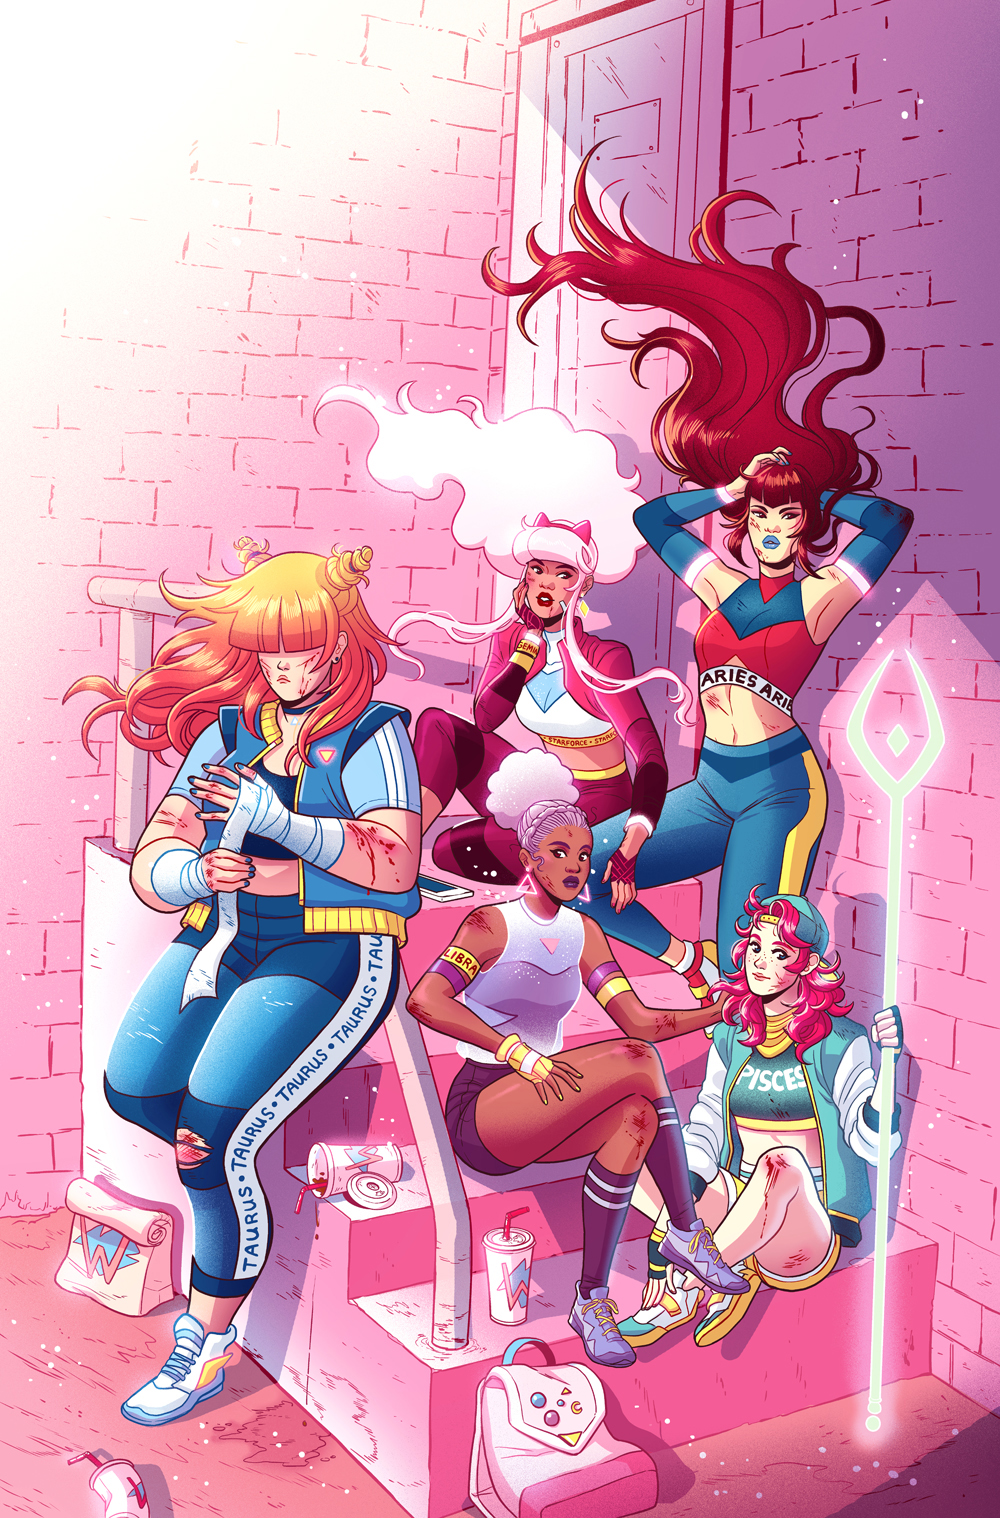  Zodiac Starforce: Cries of the Fire Prince Issue 4 cover- Dark Horse Comics 